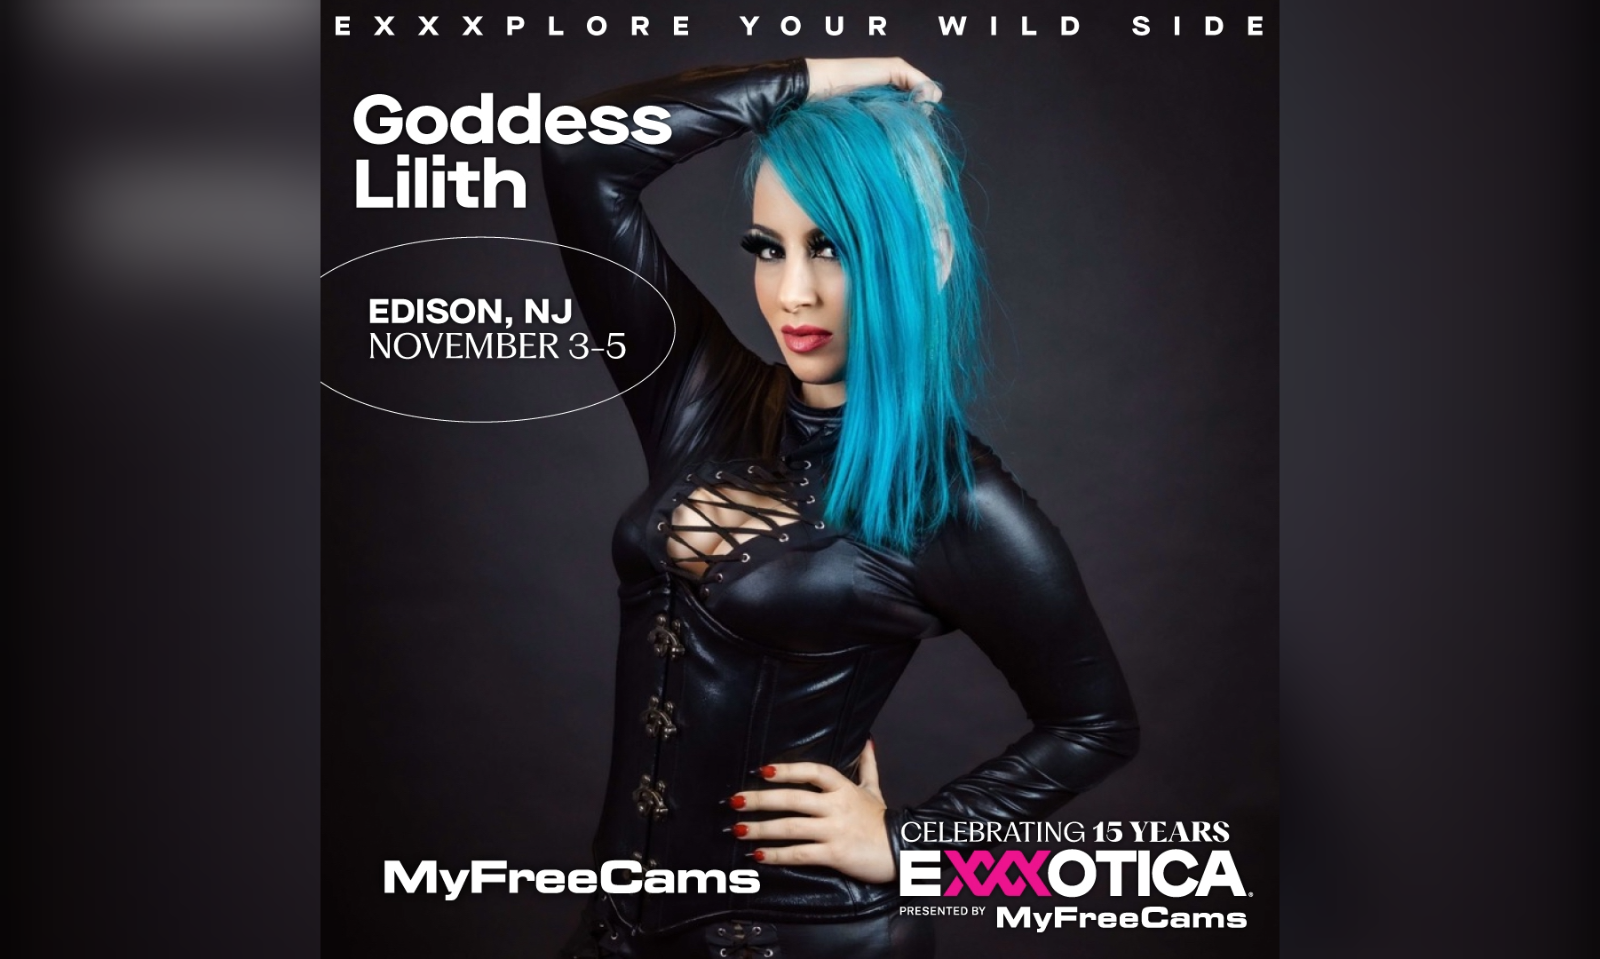 Goddess Lilith Appearing at The Dungeon This Weekend at Exxxotica